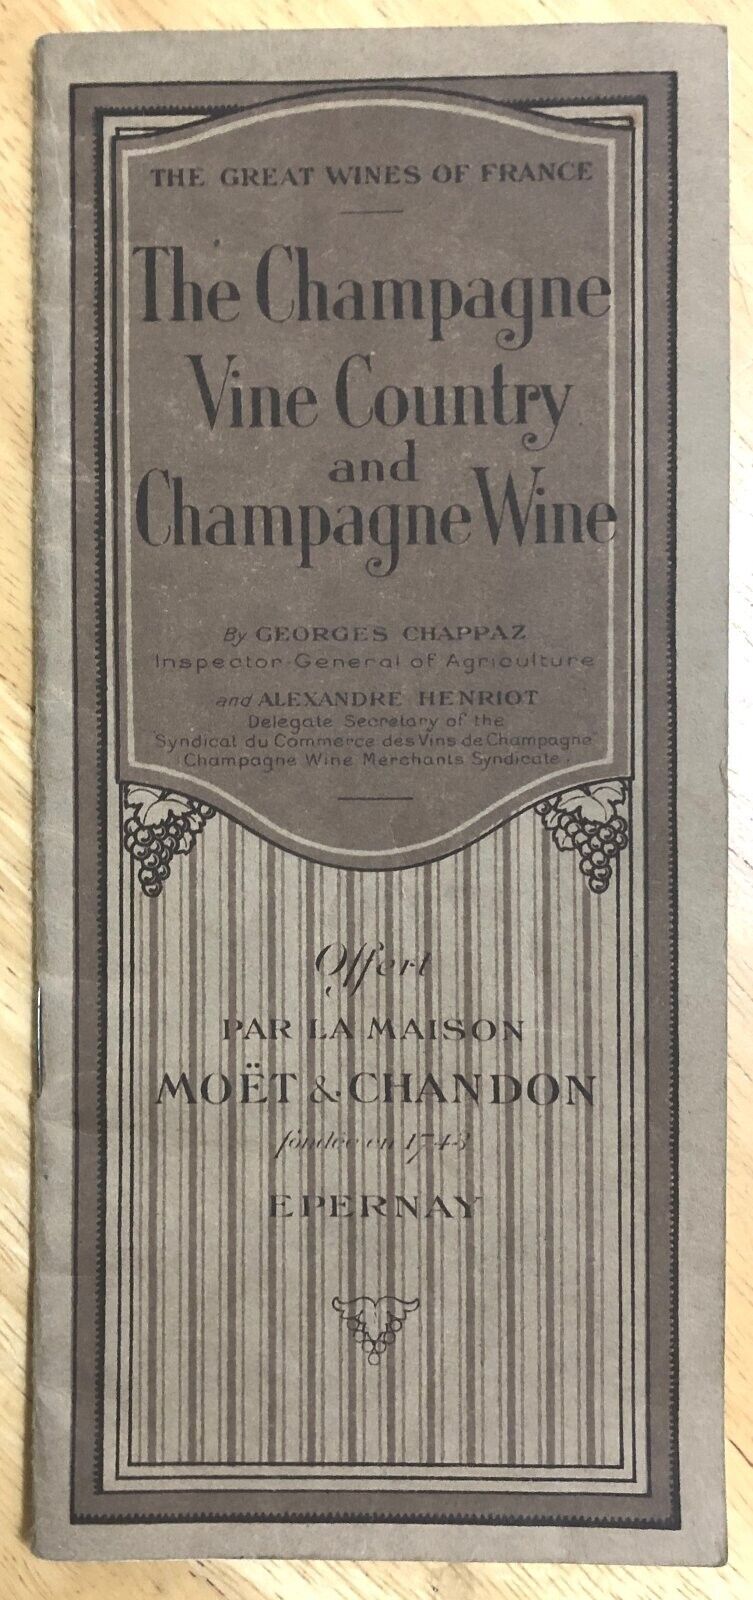 1920s Champagne Vine Country Wine Georges Chappaz Booklet Moet & Chandon France